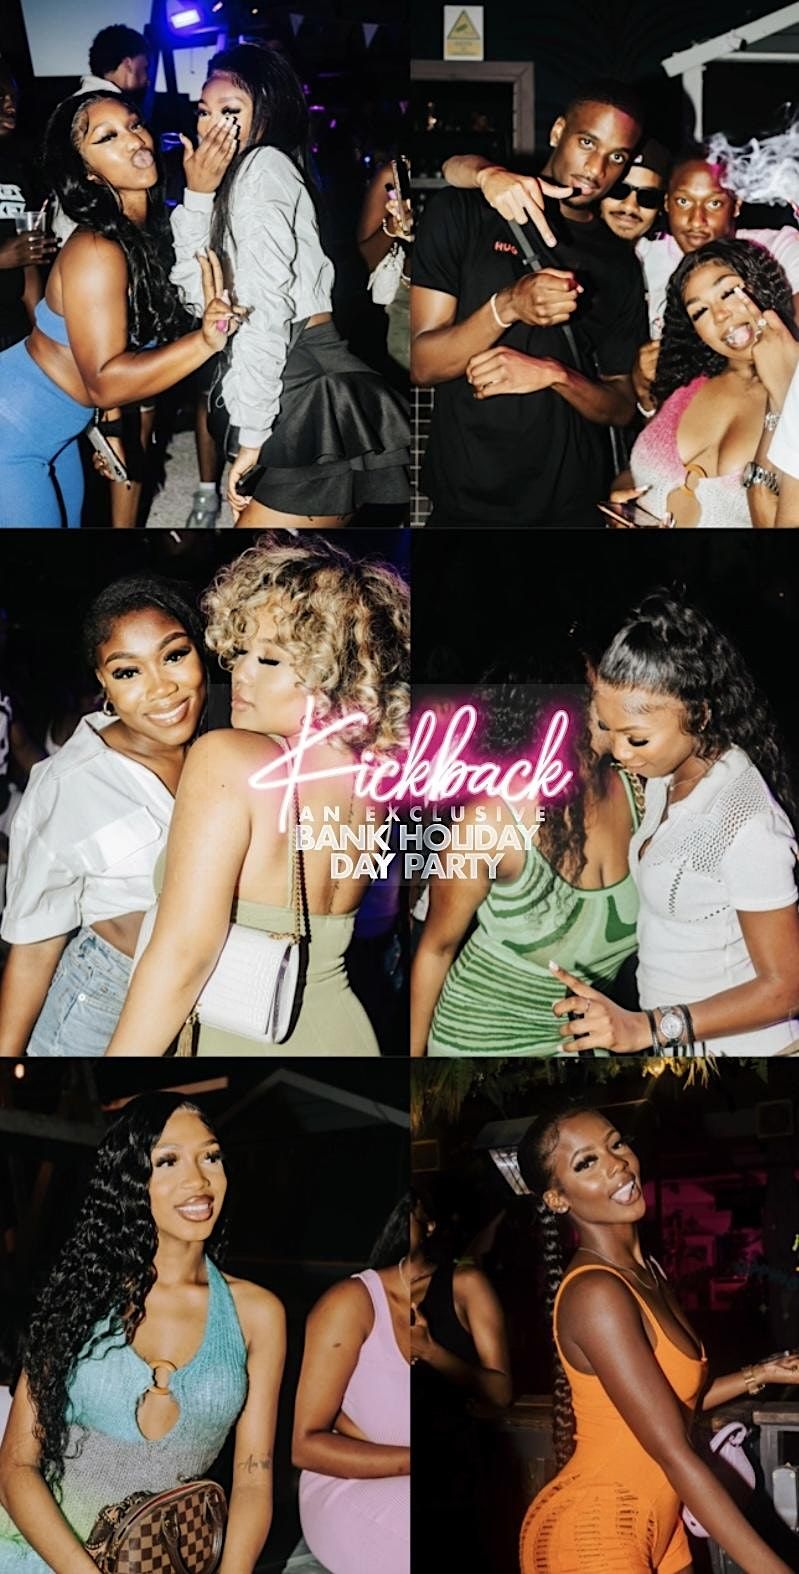 Kickback - An Exclusive Bank Holiday Day Party